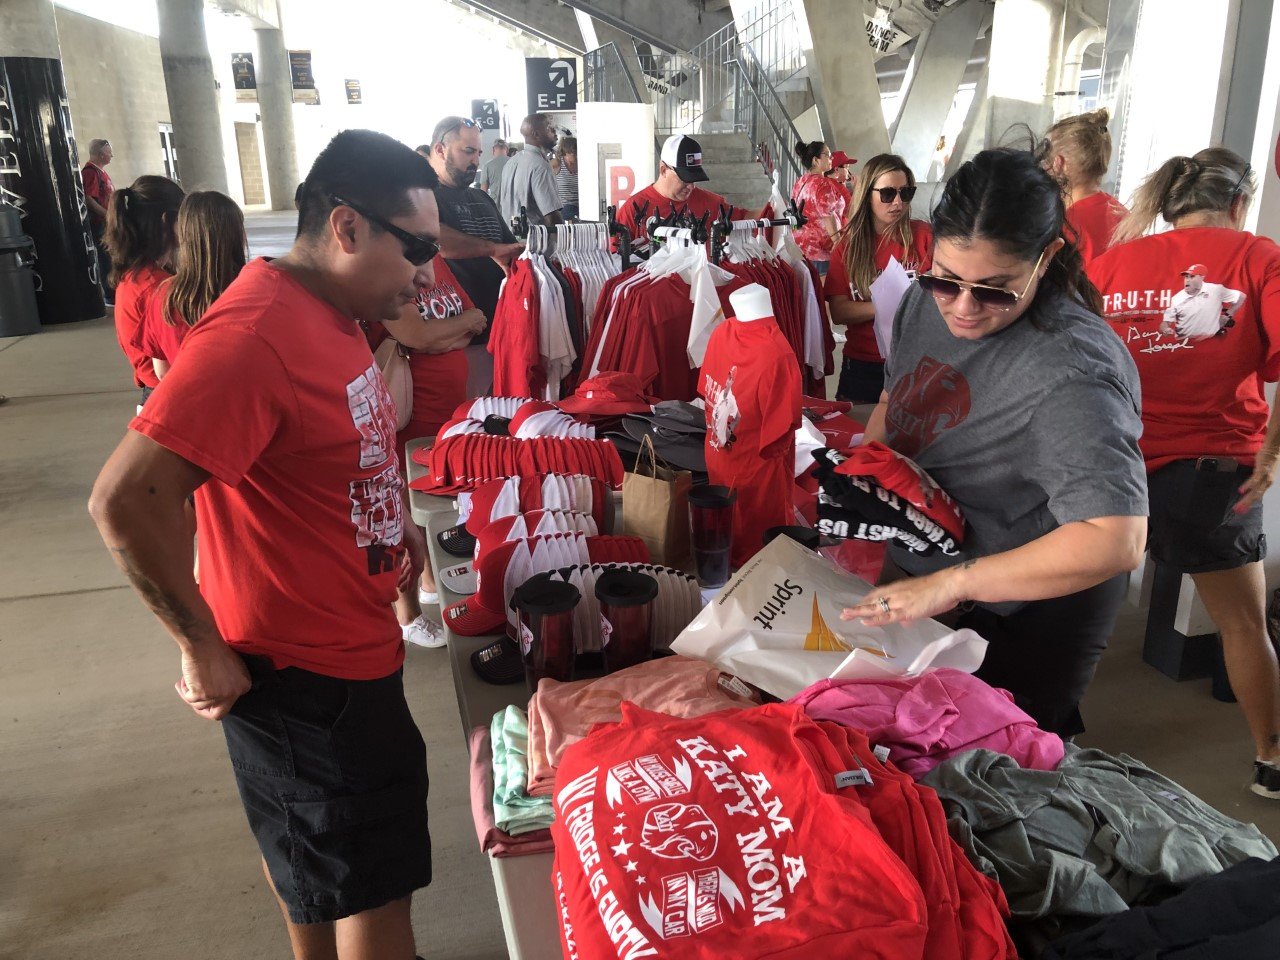 The Katy Athletic Booster Club unveiled a new line of Tiger swag at Monday’s pep rally, including a t-shirt that pays tribute to coach Gary Joseph. The shirt proclaims, “In Joseph We Trust.” Here, Tigers fan Arturo Medina purchases some swag from Booster Club volunteer Nichole Price.